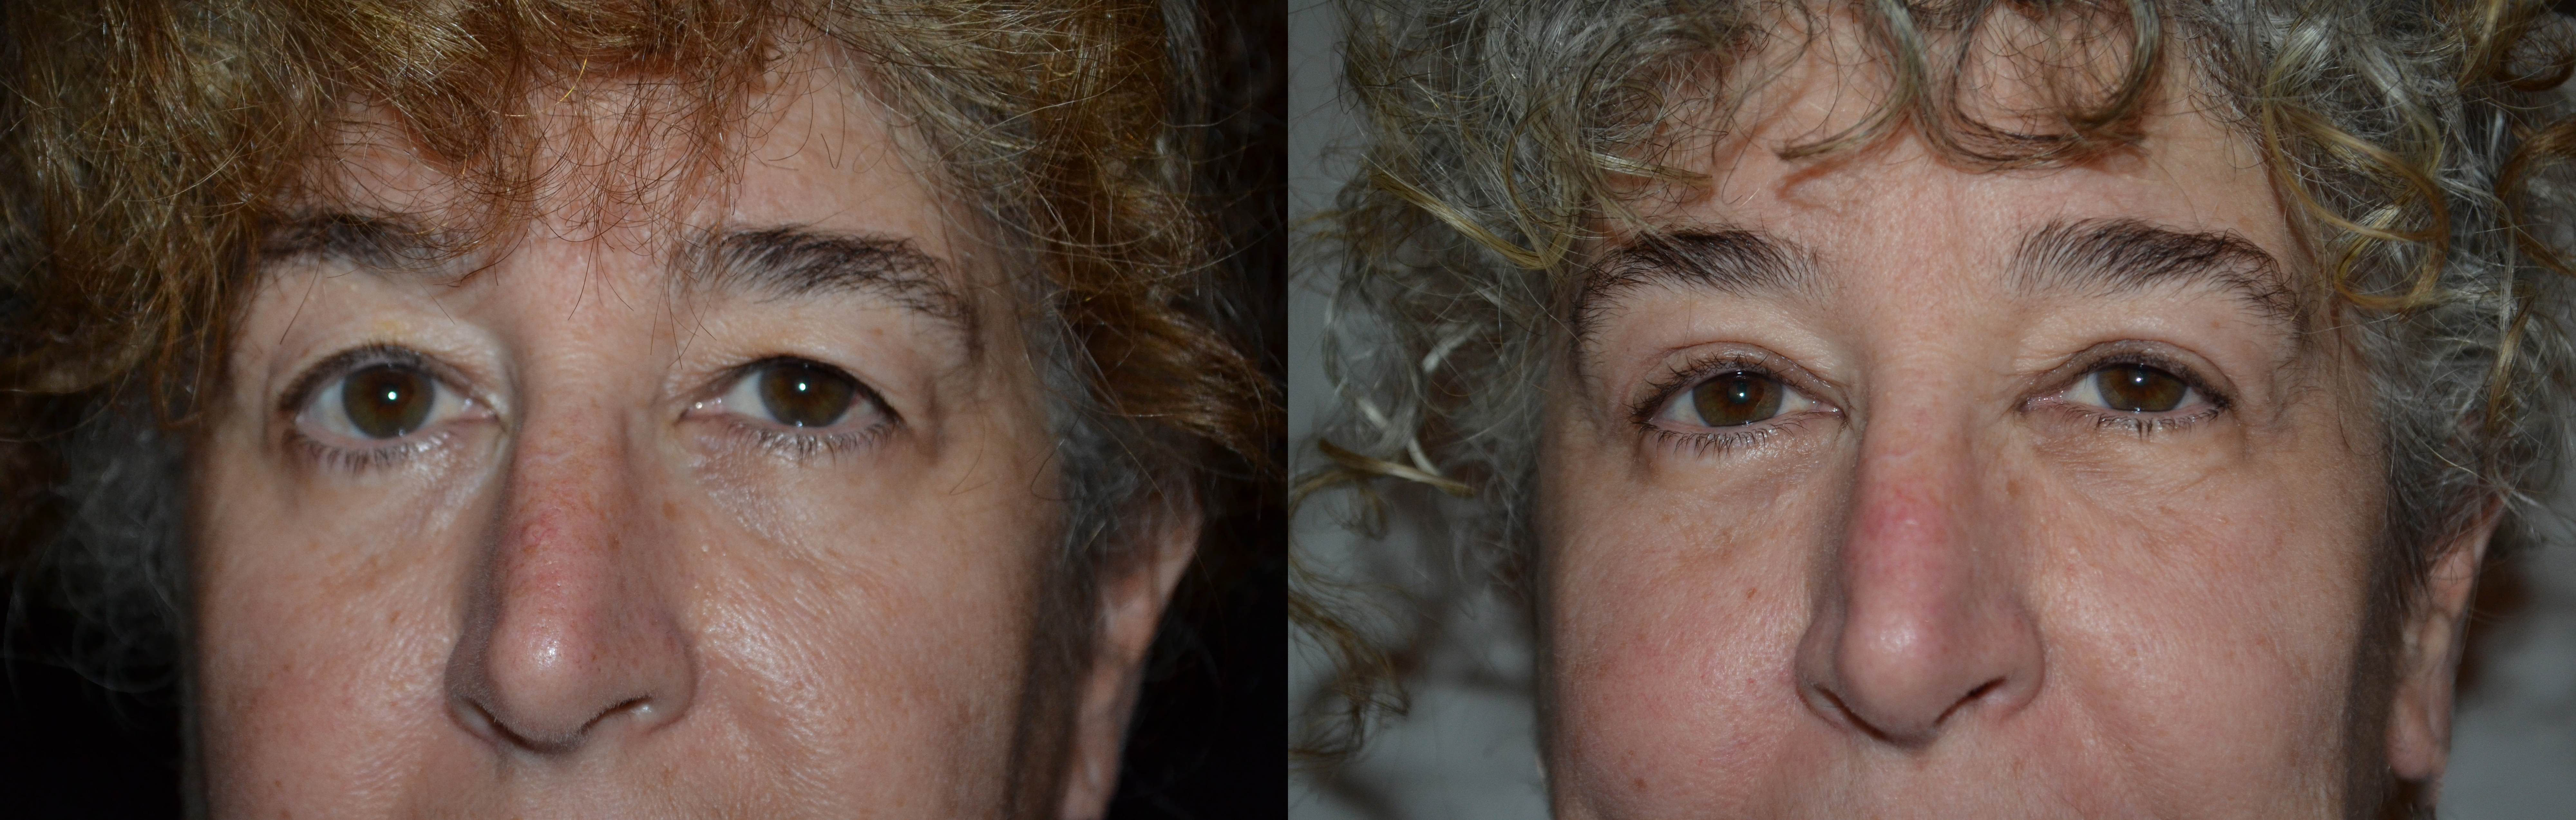 Blepharoplasty (Eyelid Surgery) before and after photo by Dr. Jeffrey L. Williams in Troy, MI